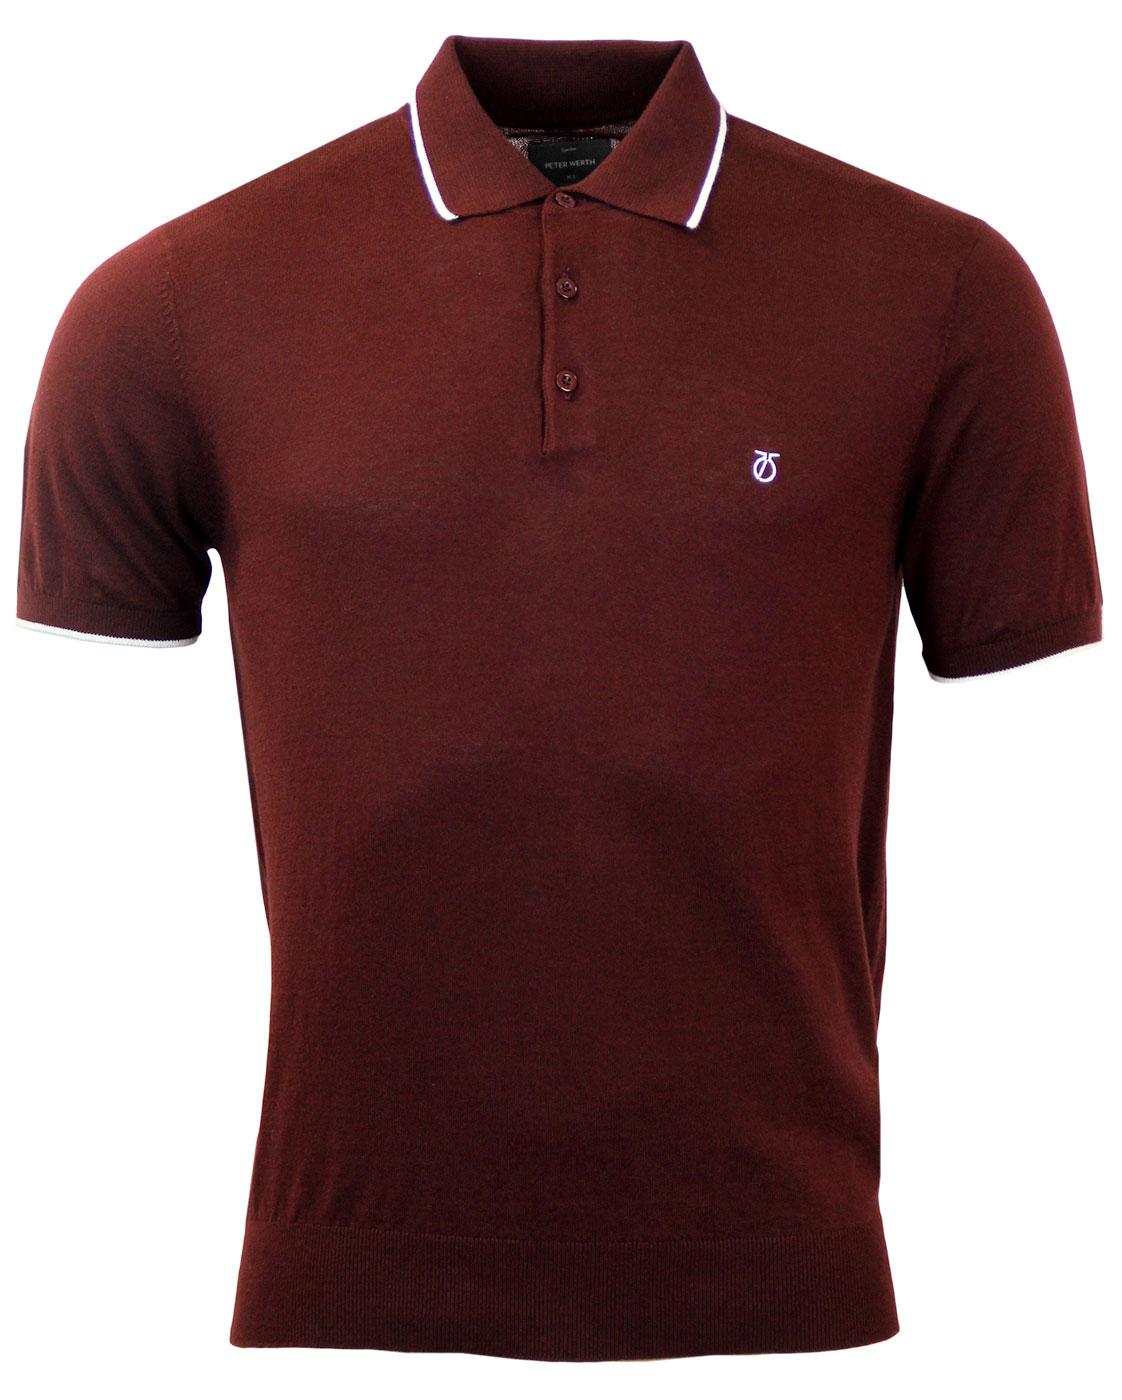 Bernwell PETER WERTH Retro Fine Knit Tipped Polo